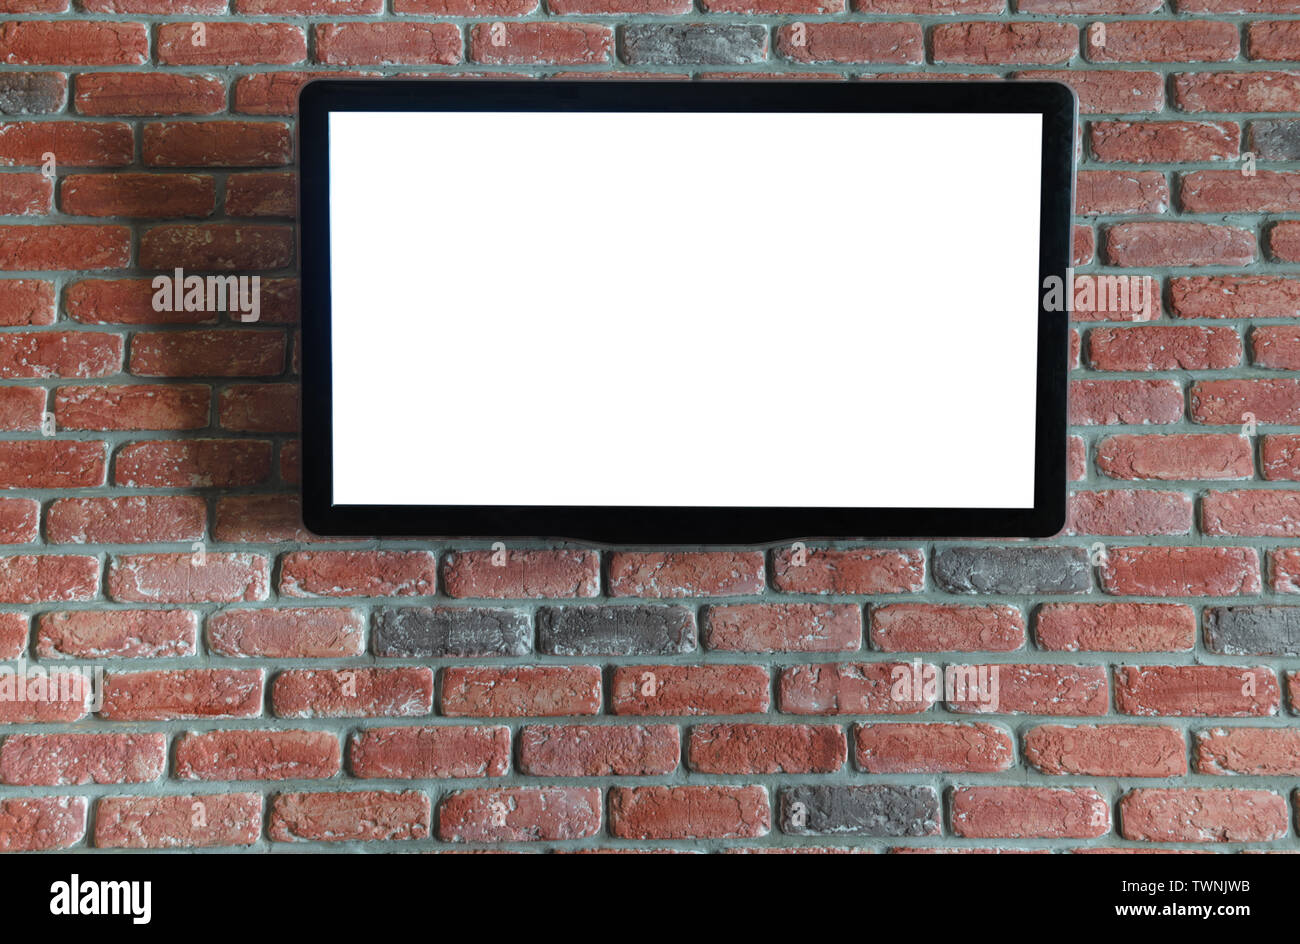 TV on the red brick wall with isolated screen Stock Photo